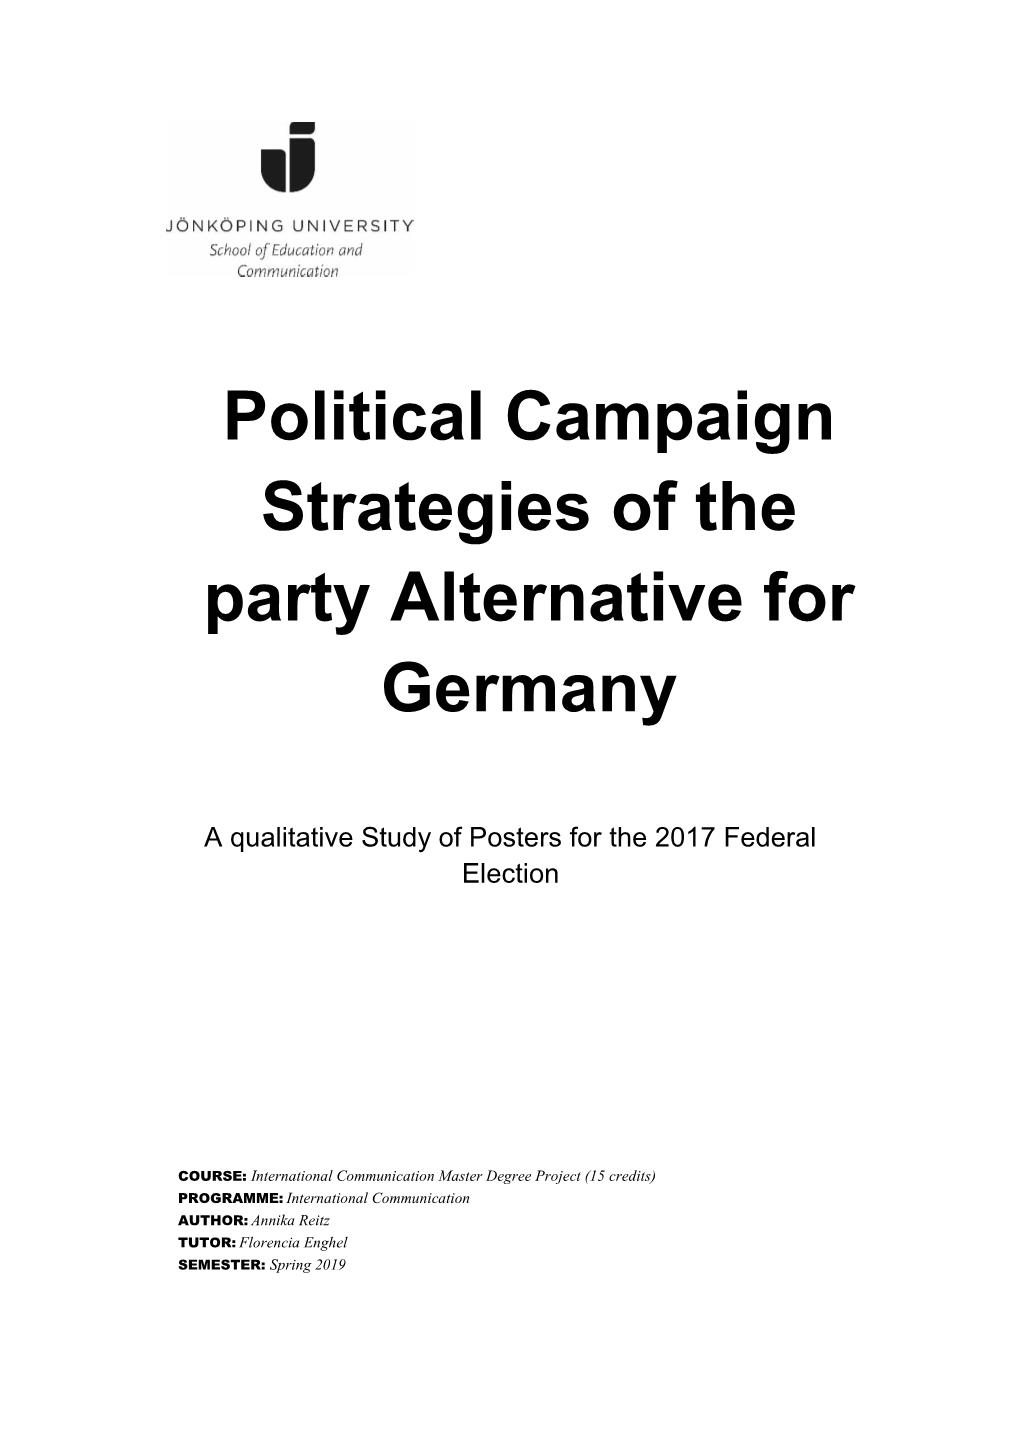 Political Campaign Strategies of the Party Alternative for Germany